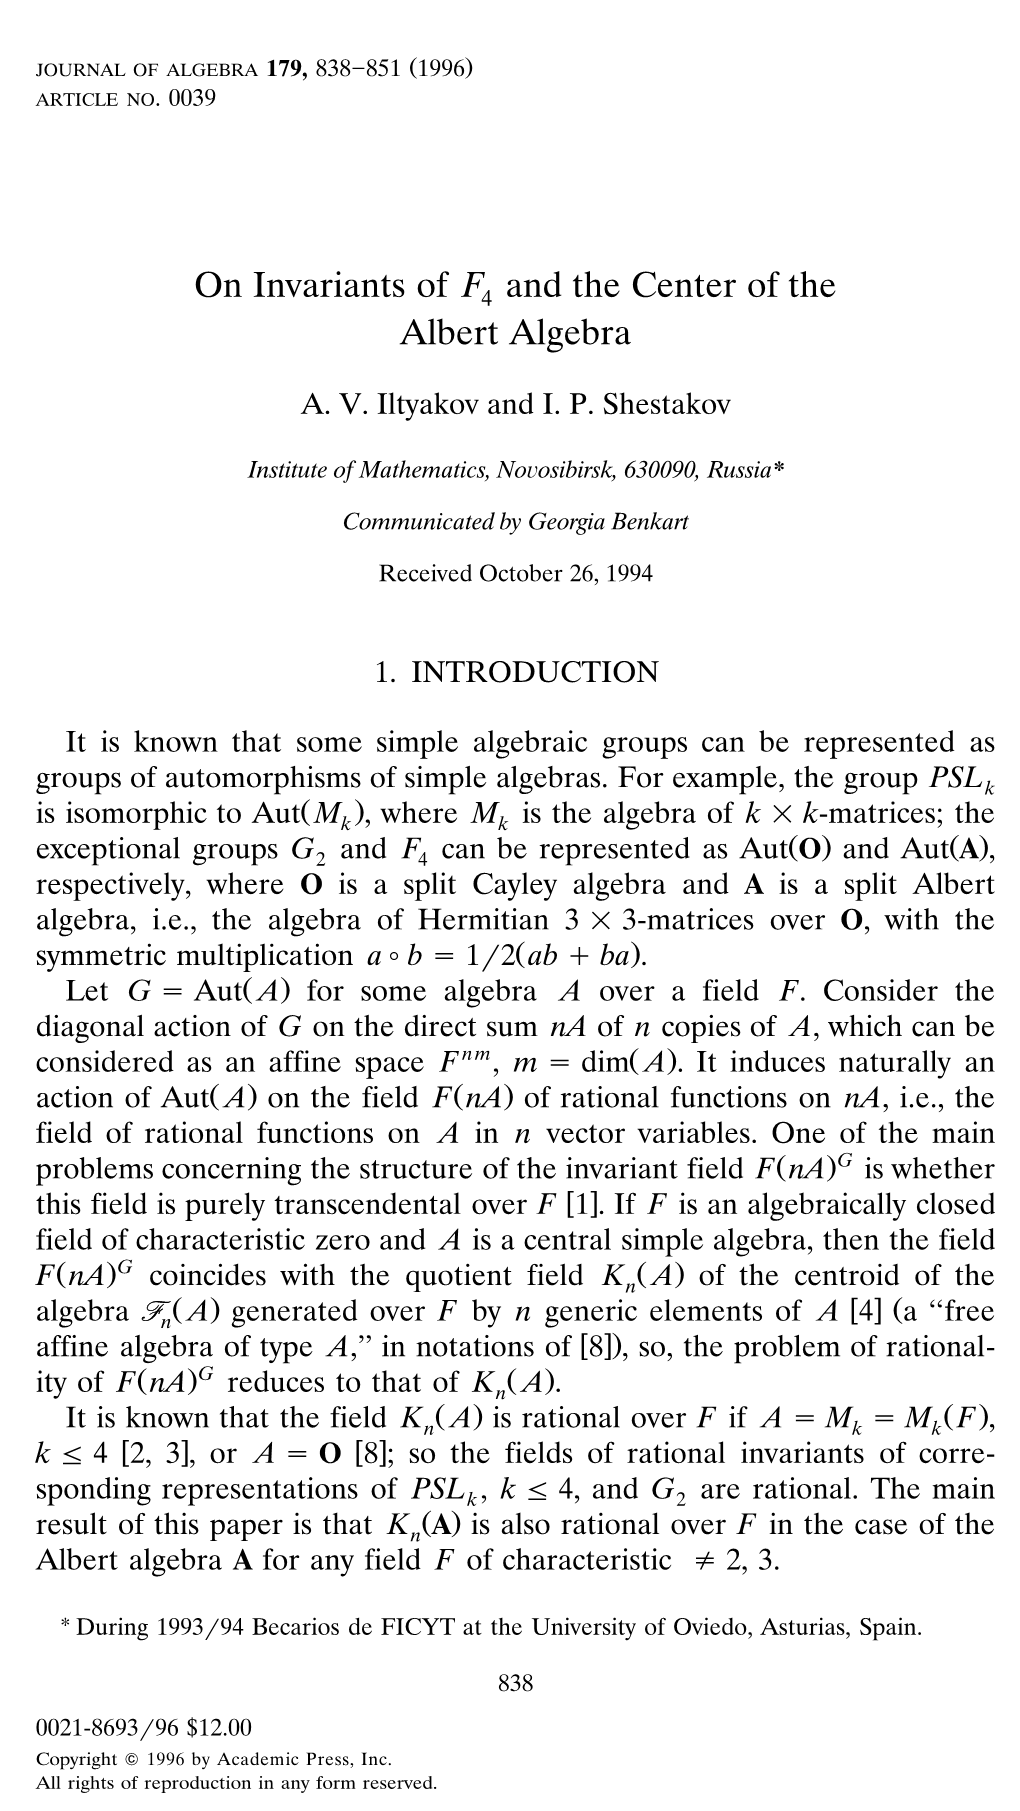 On Invariants of F4 and the Center of the Albert Algebra